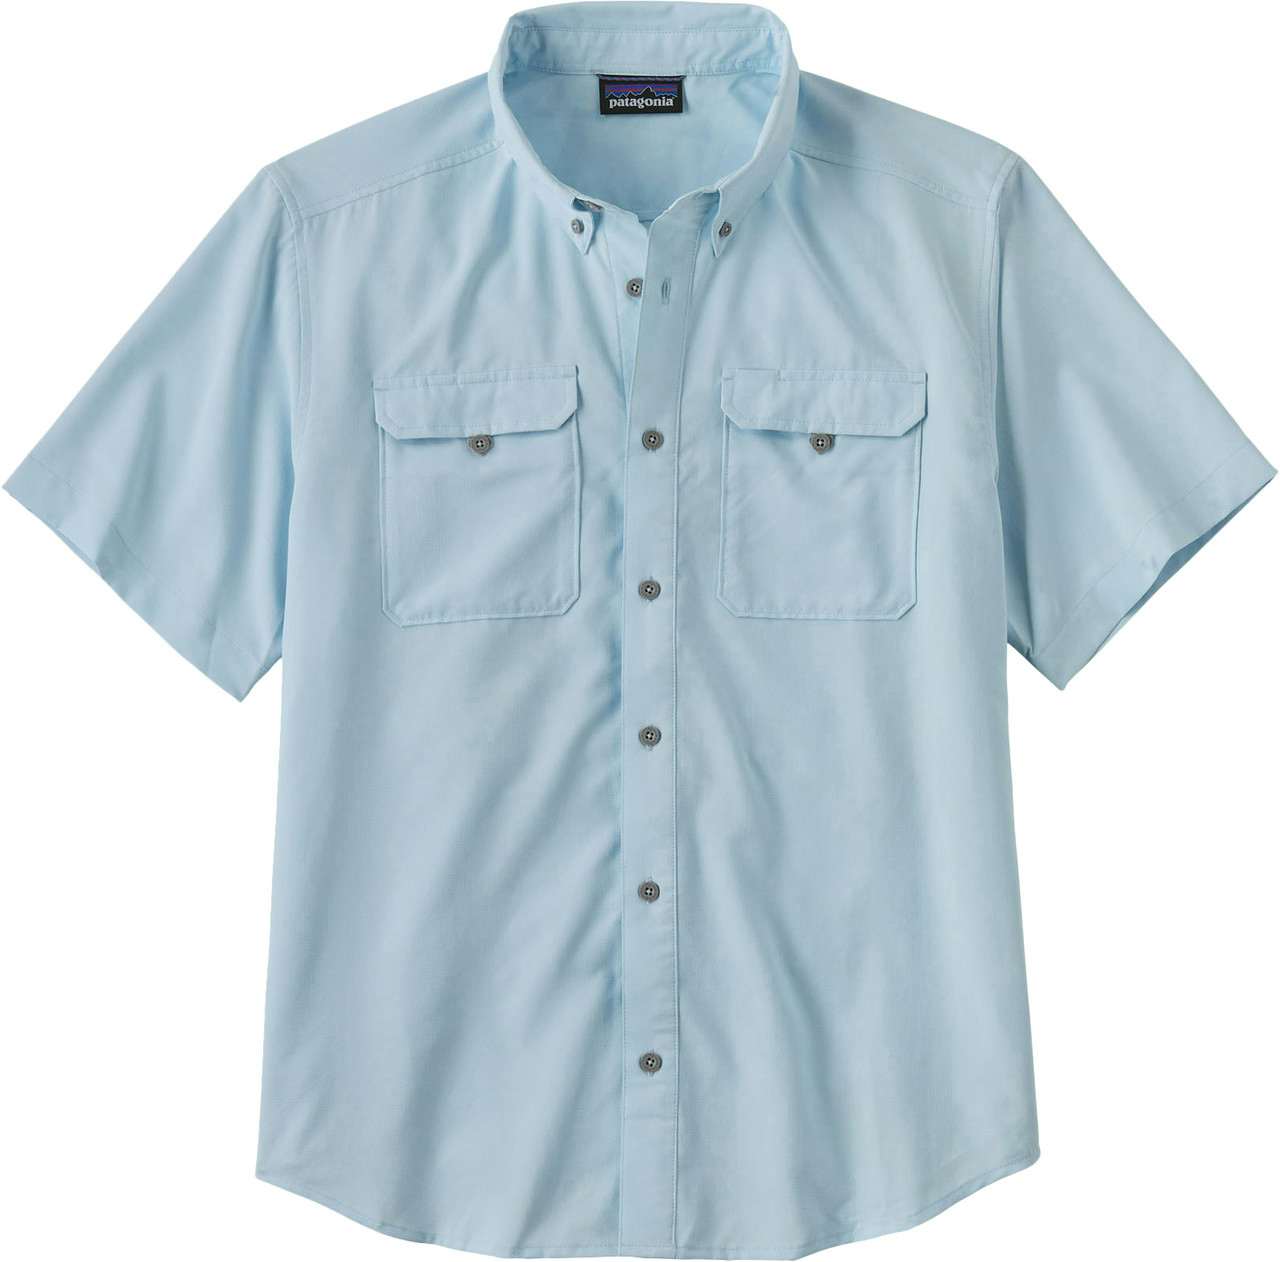 Self Guided Hike Shirt Chilled Blue